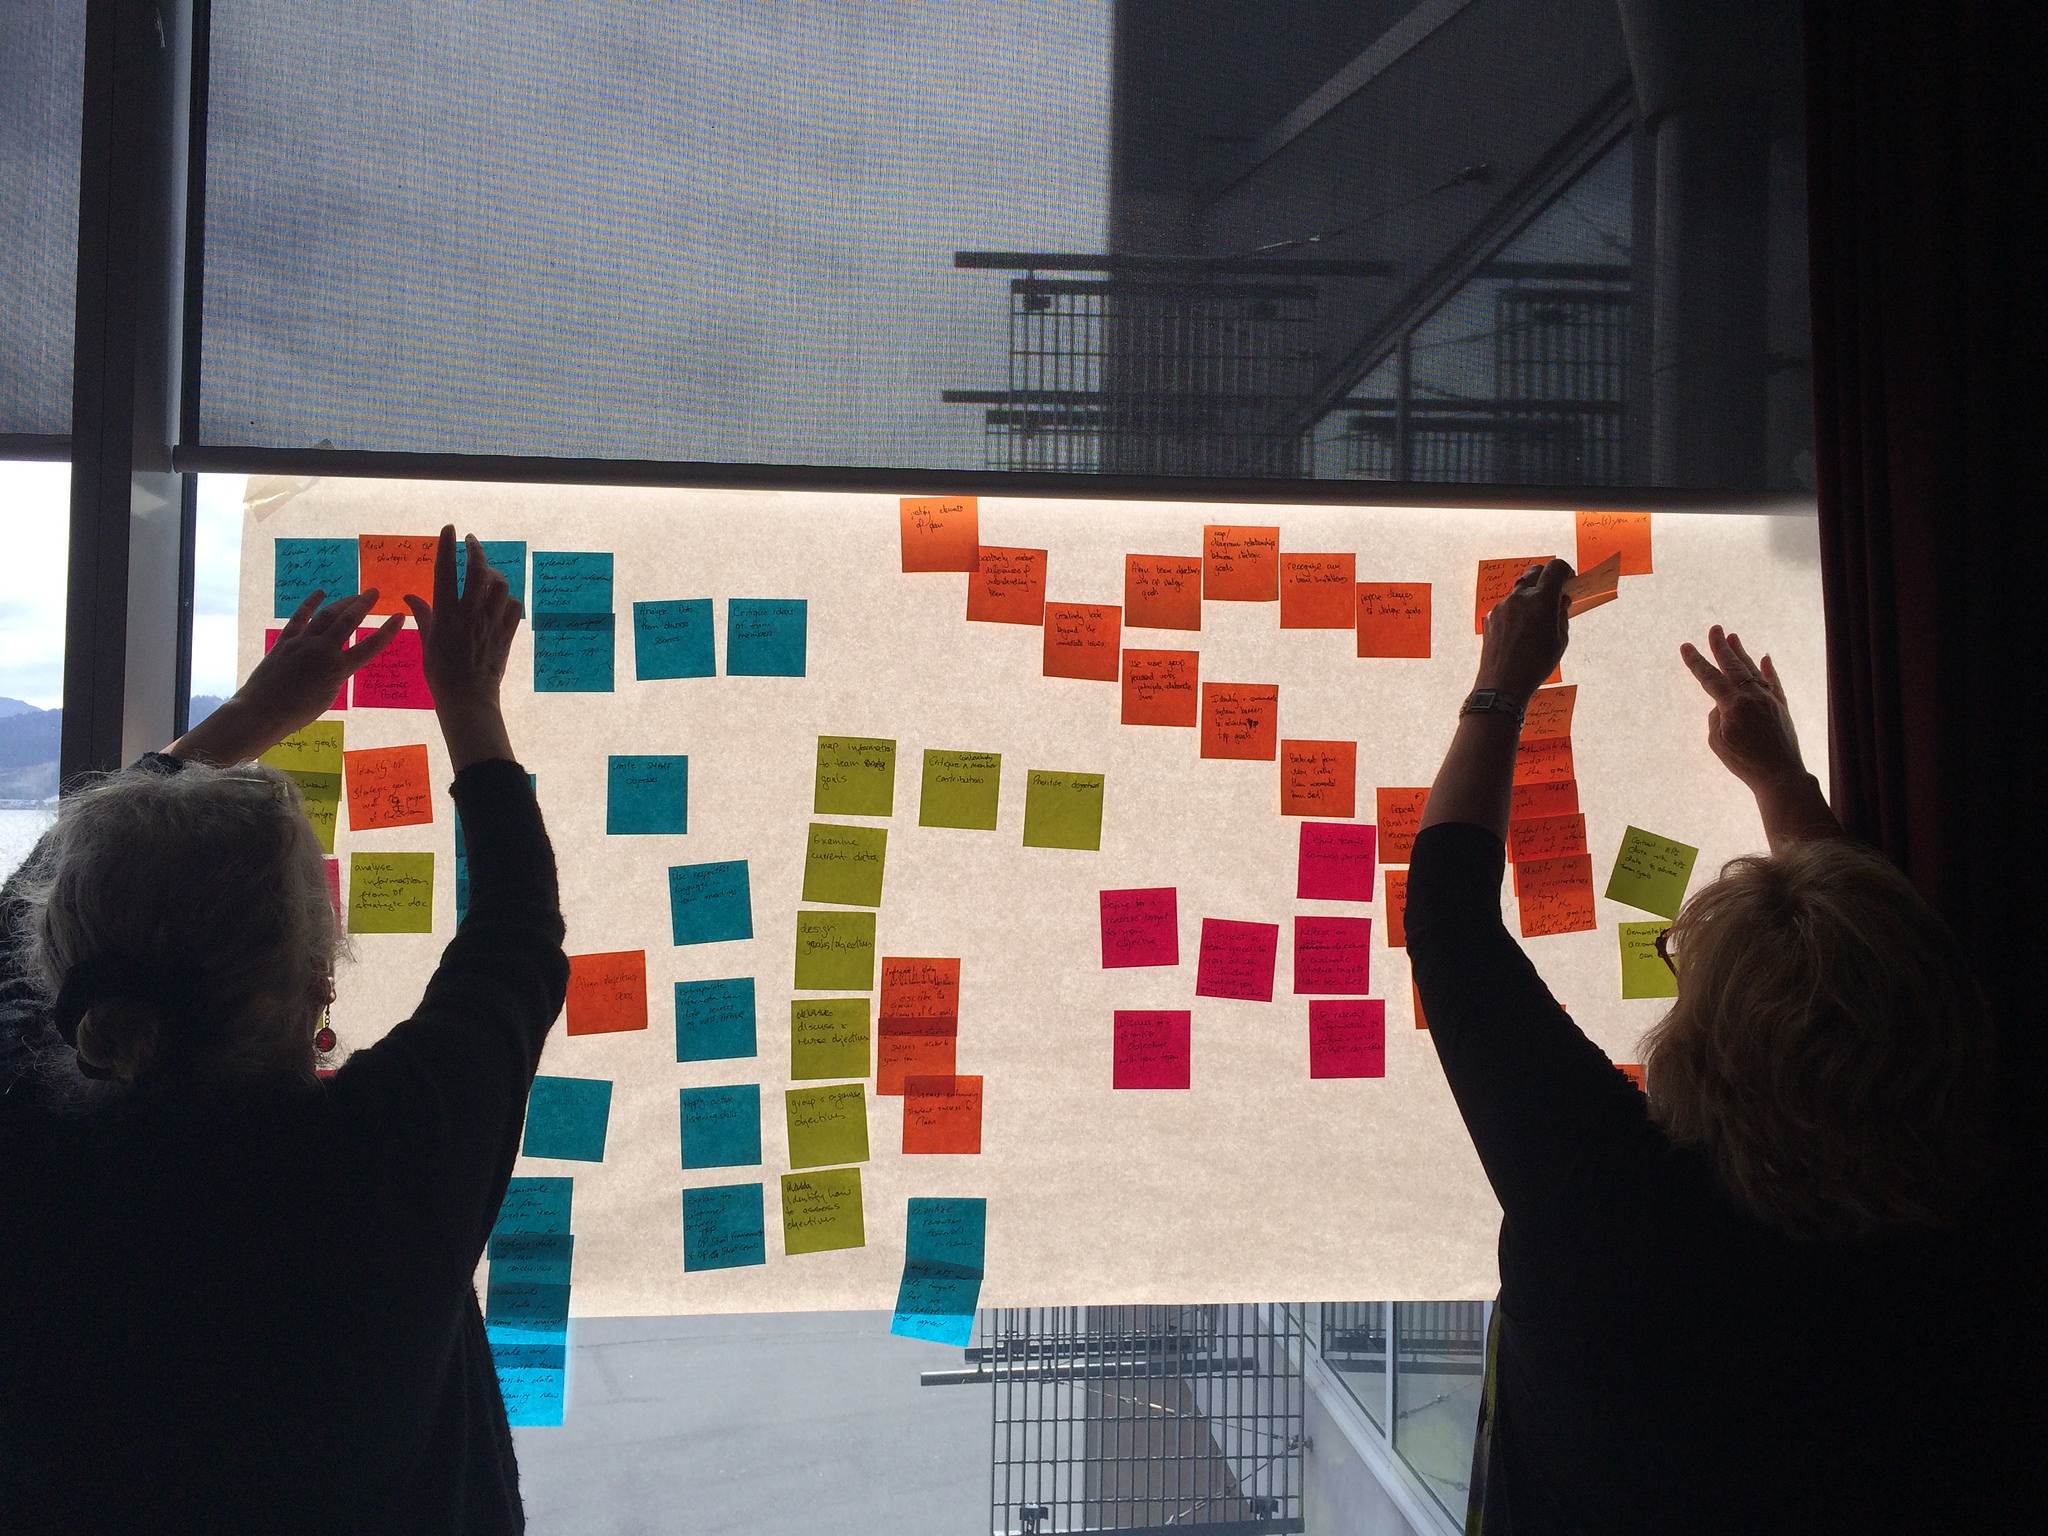 Two women putting Post-it notes on a whiteboard.